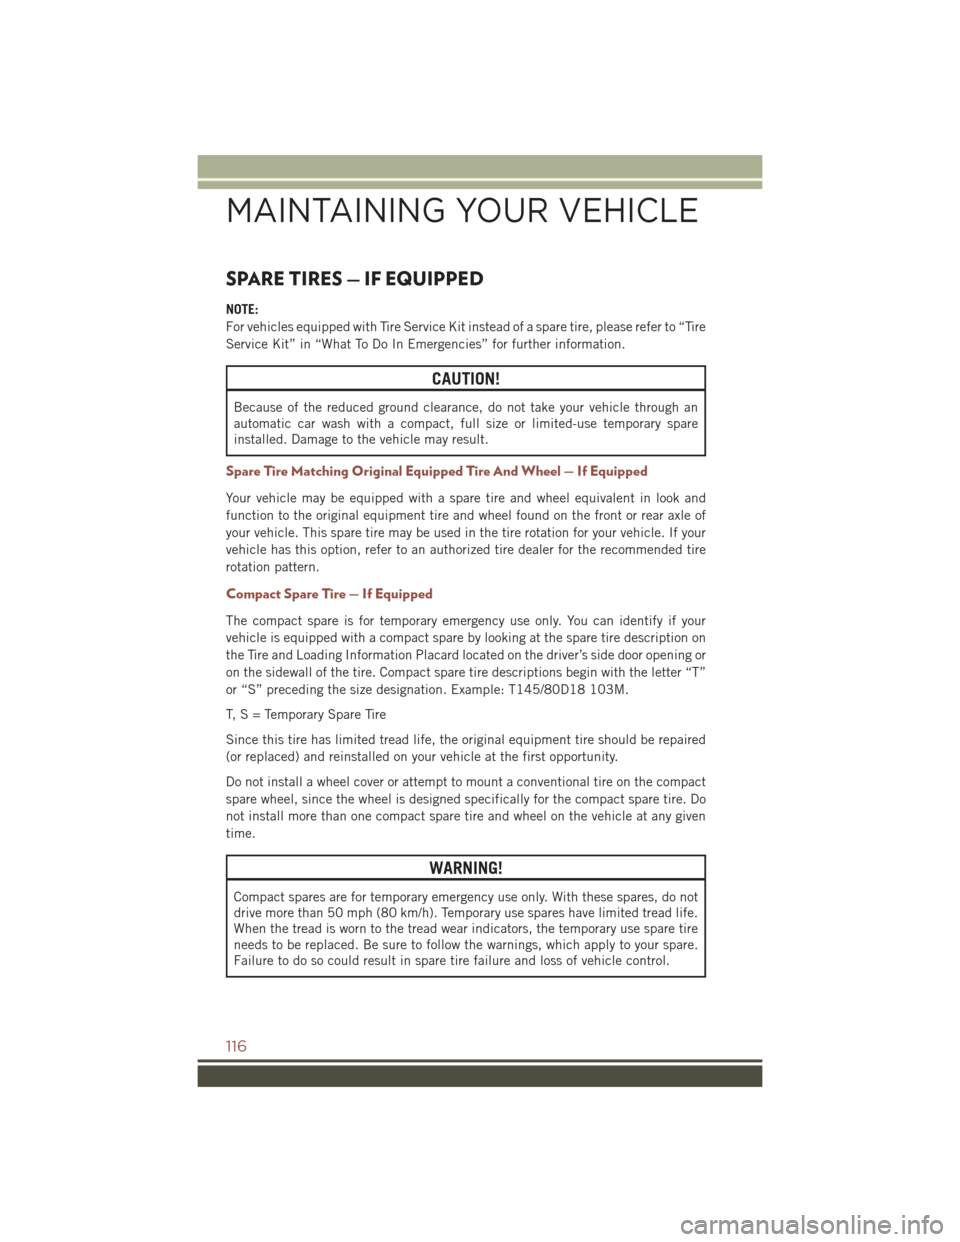 JEEP COMPASS 2015 1.G User Guide SPARE TIRES — IF EQUIPPED
NOTE:
For vehicles equipped with Tire Service Kit instead of a spare tire, please refer to “Tire
Service Kit” in “What To Do In Emergencies” for further information